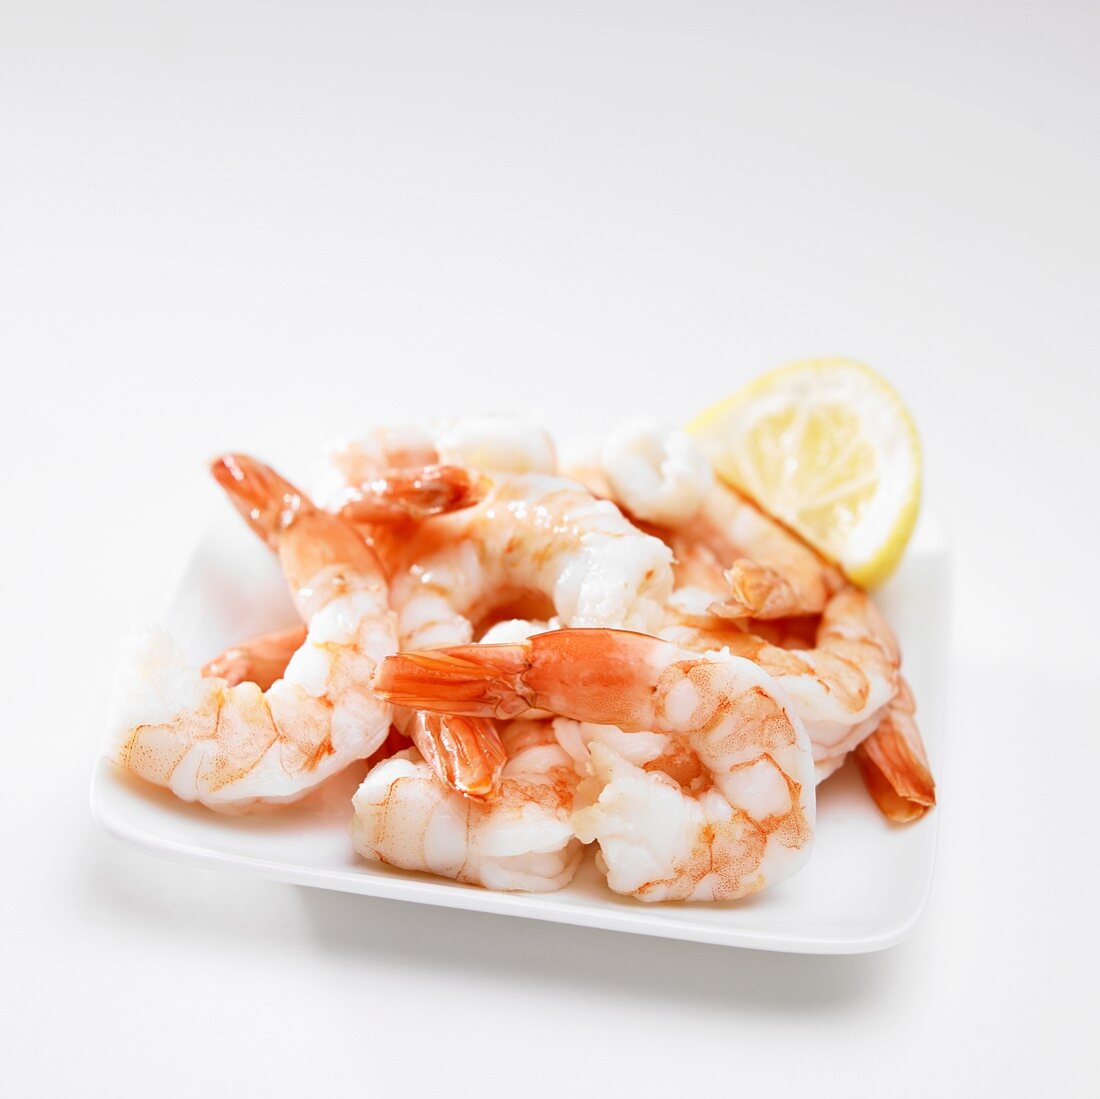 Plate of Cooked Shrimp with Lemon